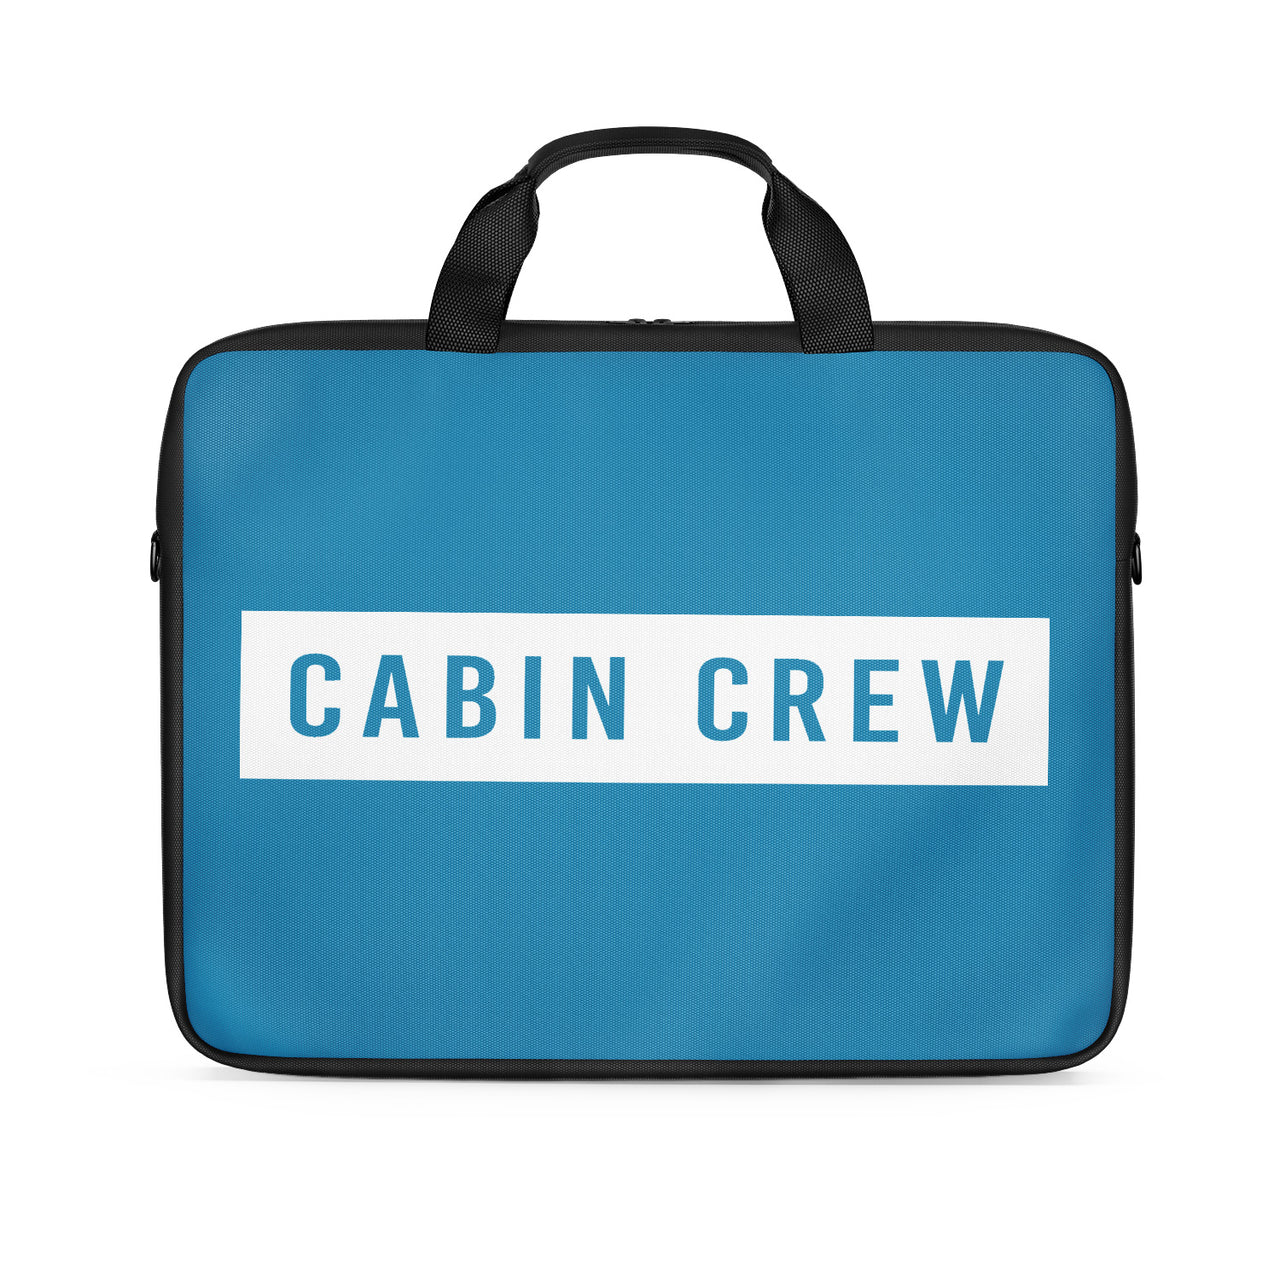 Cabin Crew Text Designed Laptop & Tablet Bags